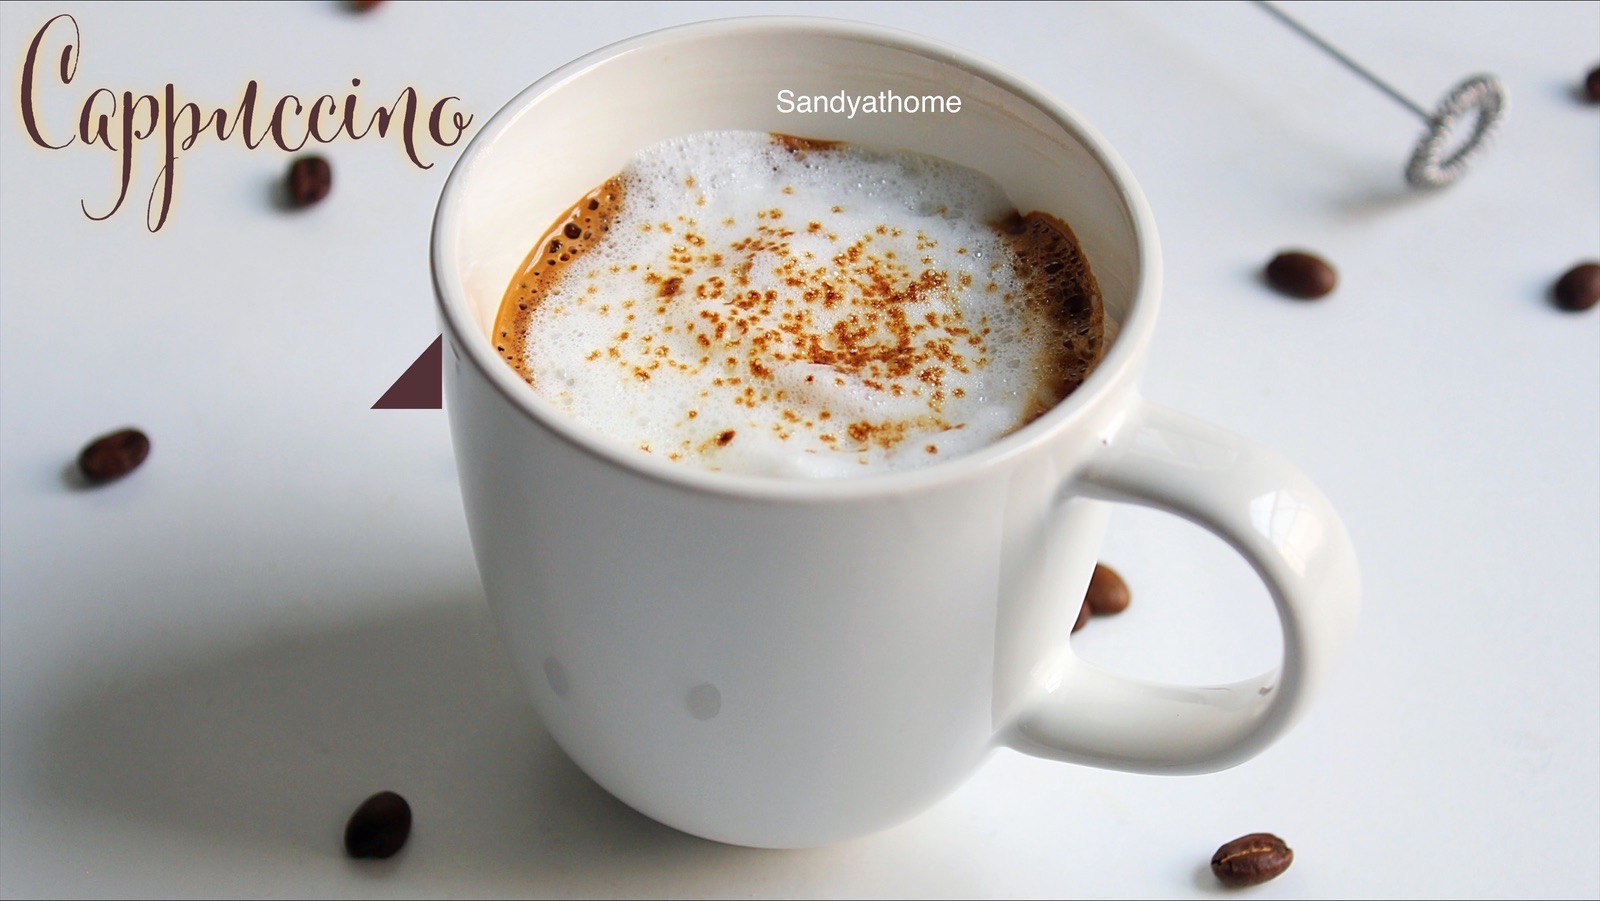 Photo How to Make Cappuccino Without a Coffee Machine in di Malang